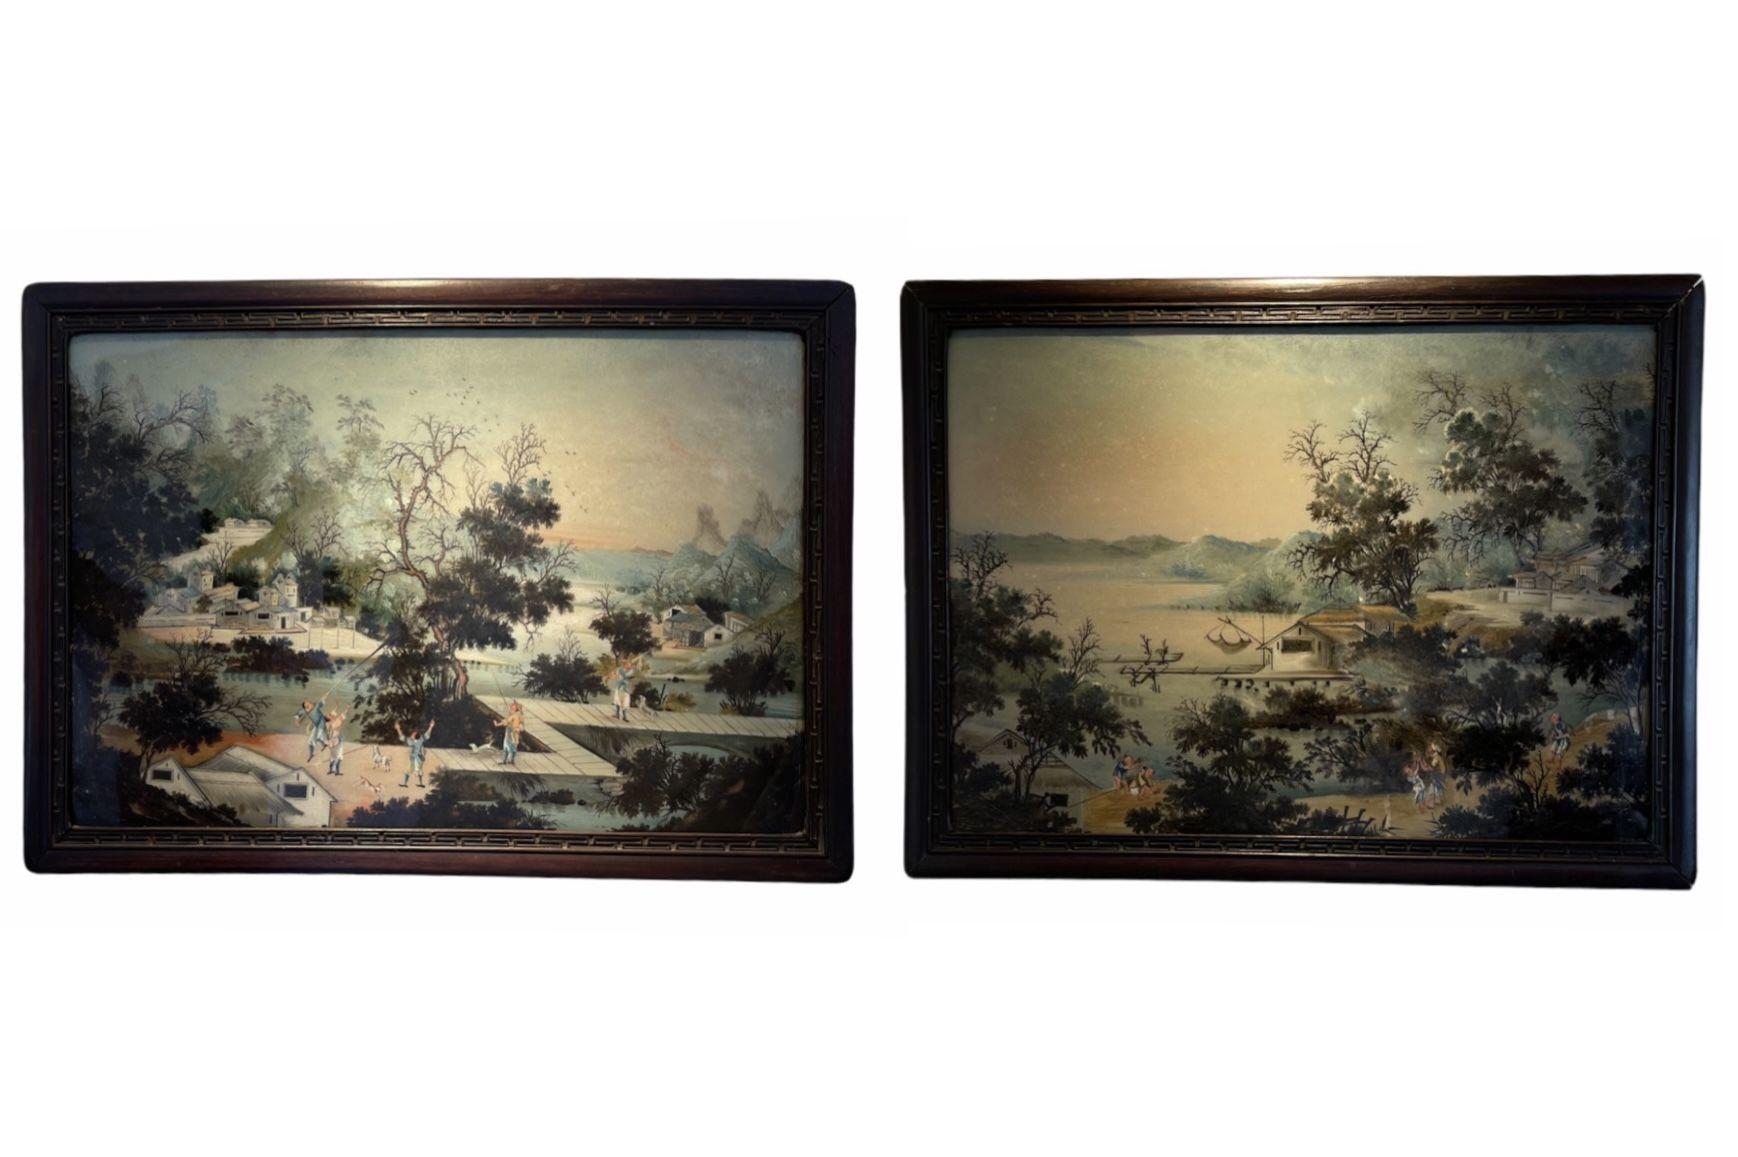 This pair of reverse glass paintings are truly one-of-a-Kind pieces. The scene has been beautifully rendered, with great attention paid to detail. These piece were created in China during the Qing dynasty (1644-1912). Reverse glass painting